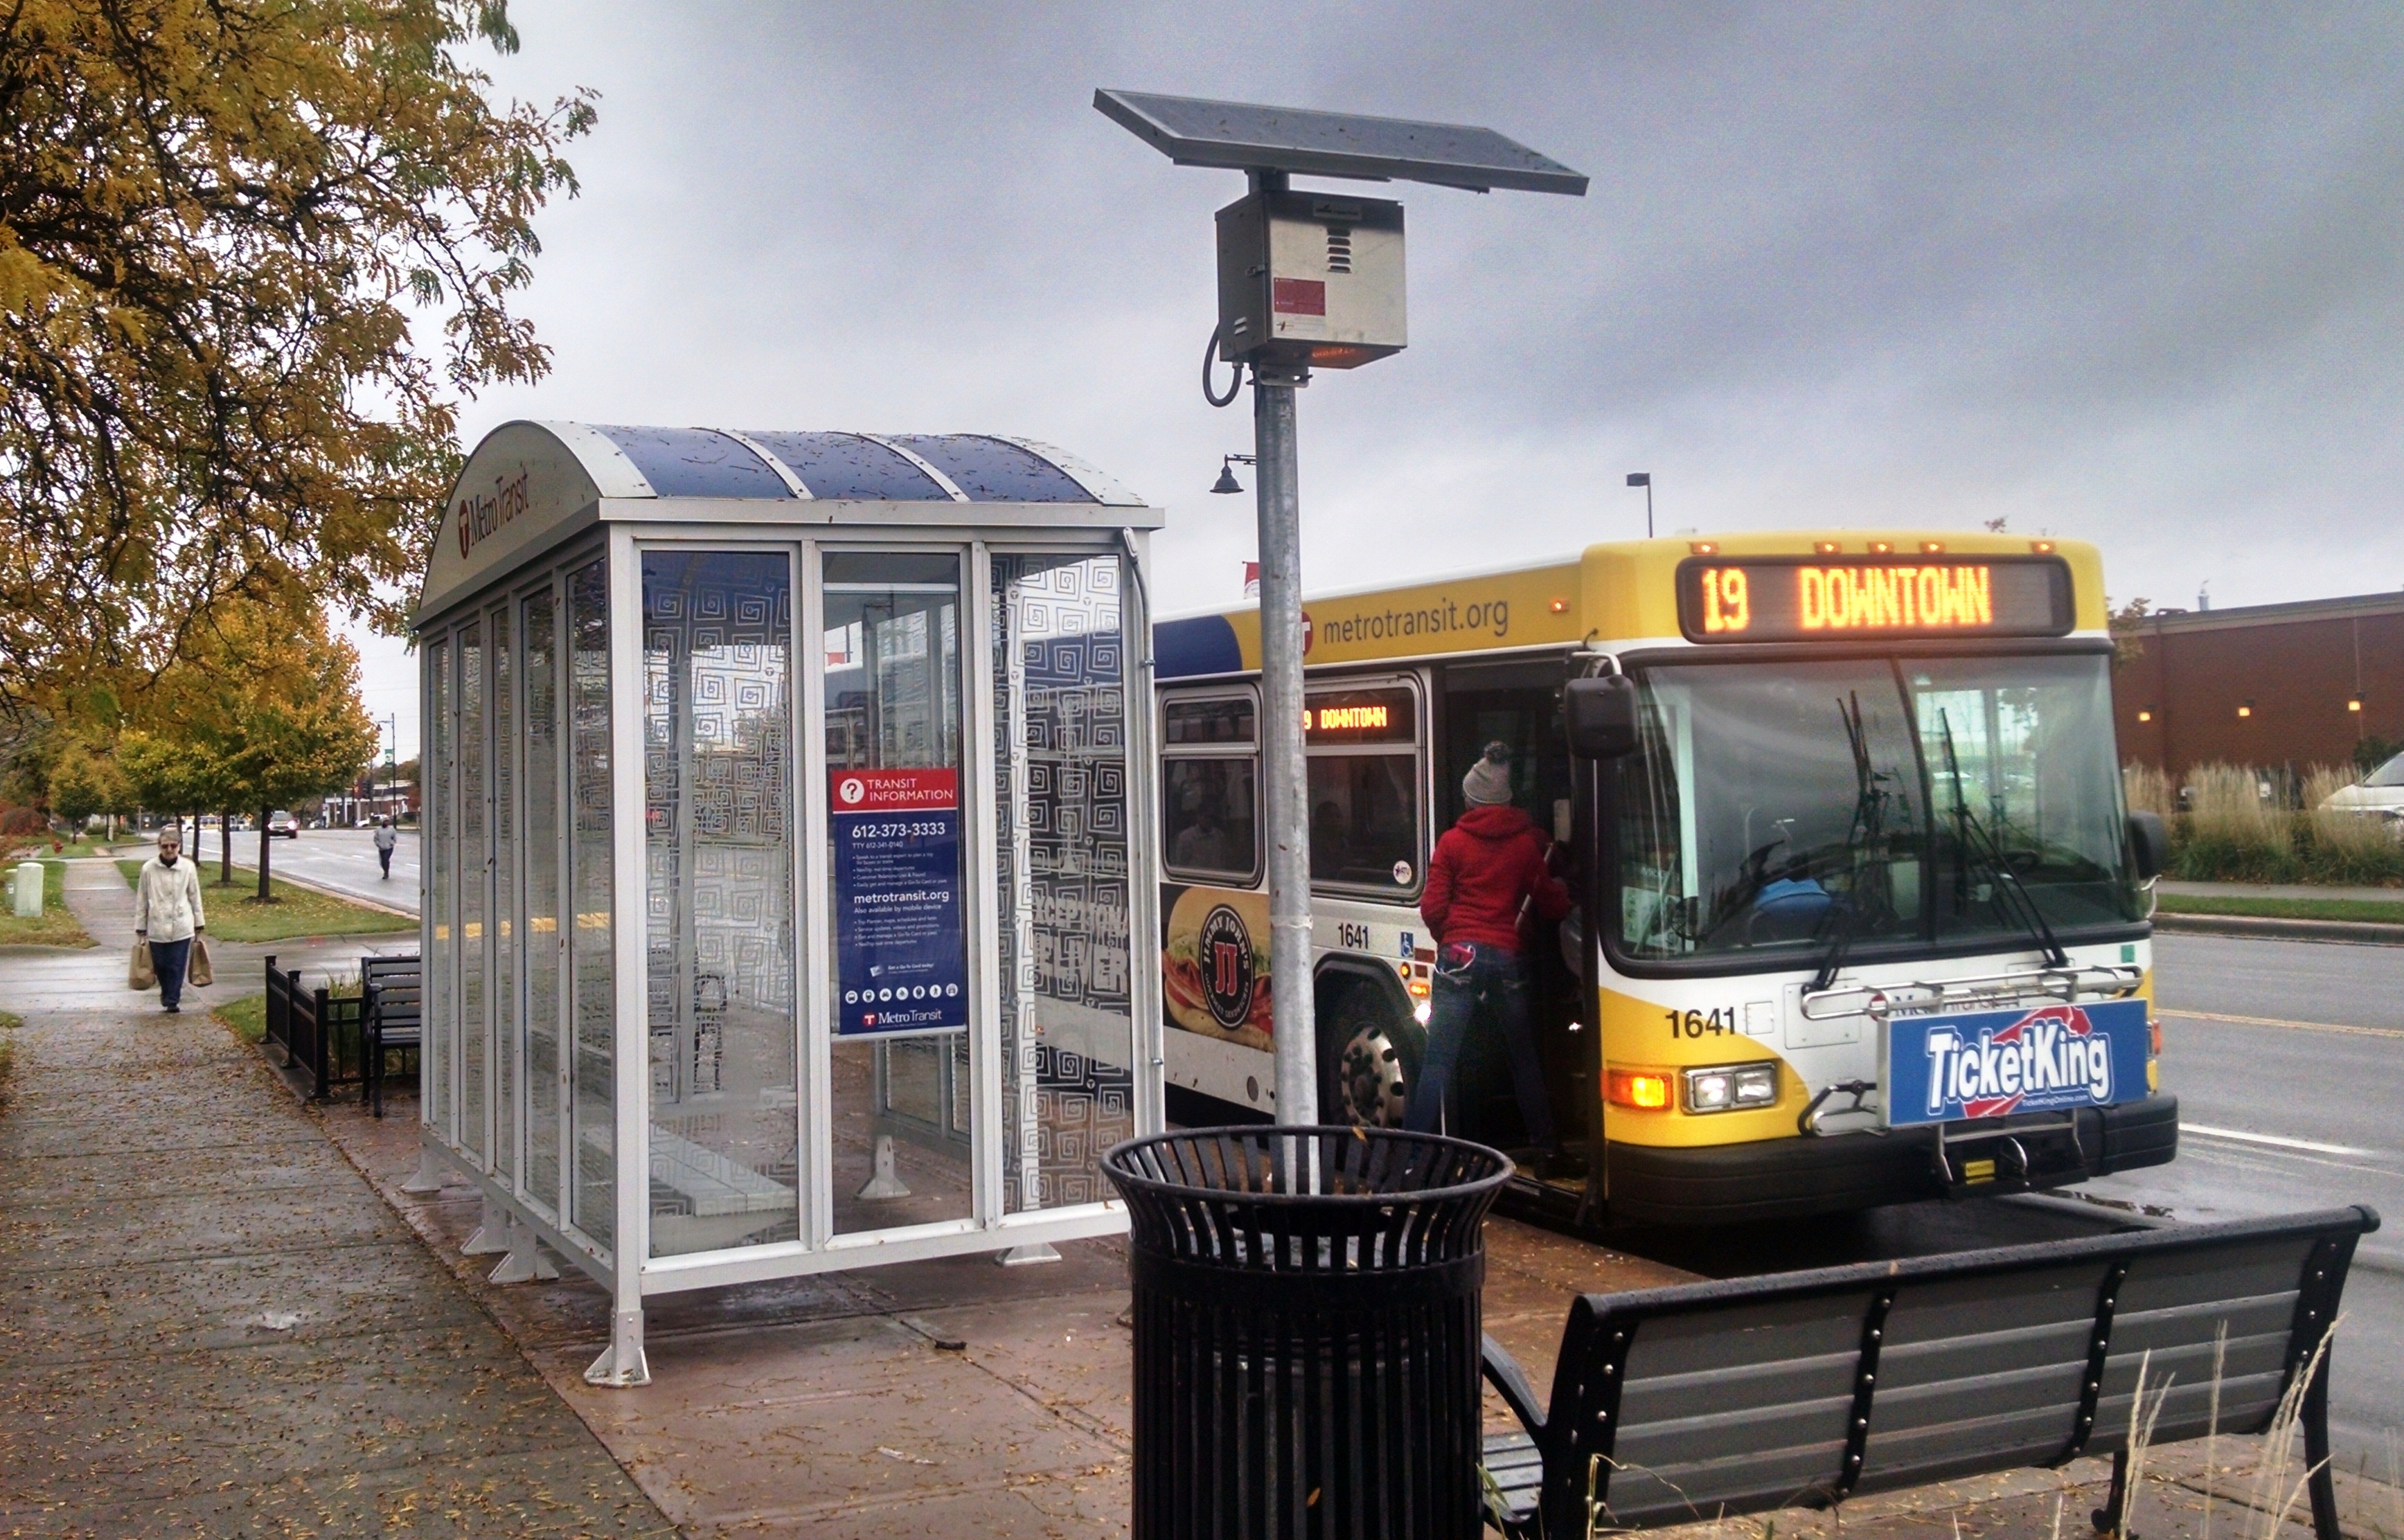 A pole-mounted solar panel is used to provide power for lighting at this Metro Transit bus shelter.